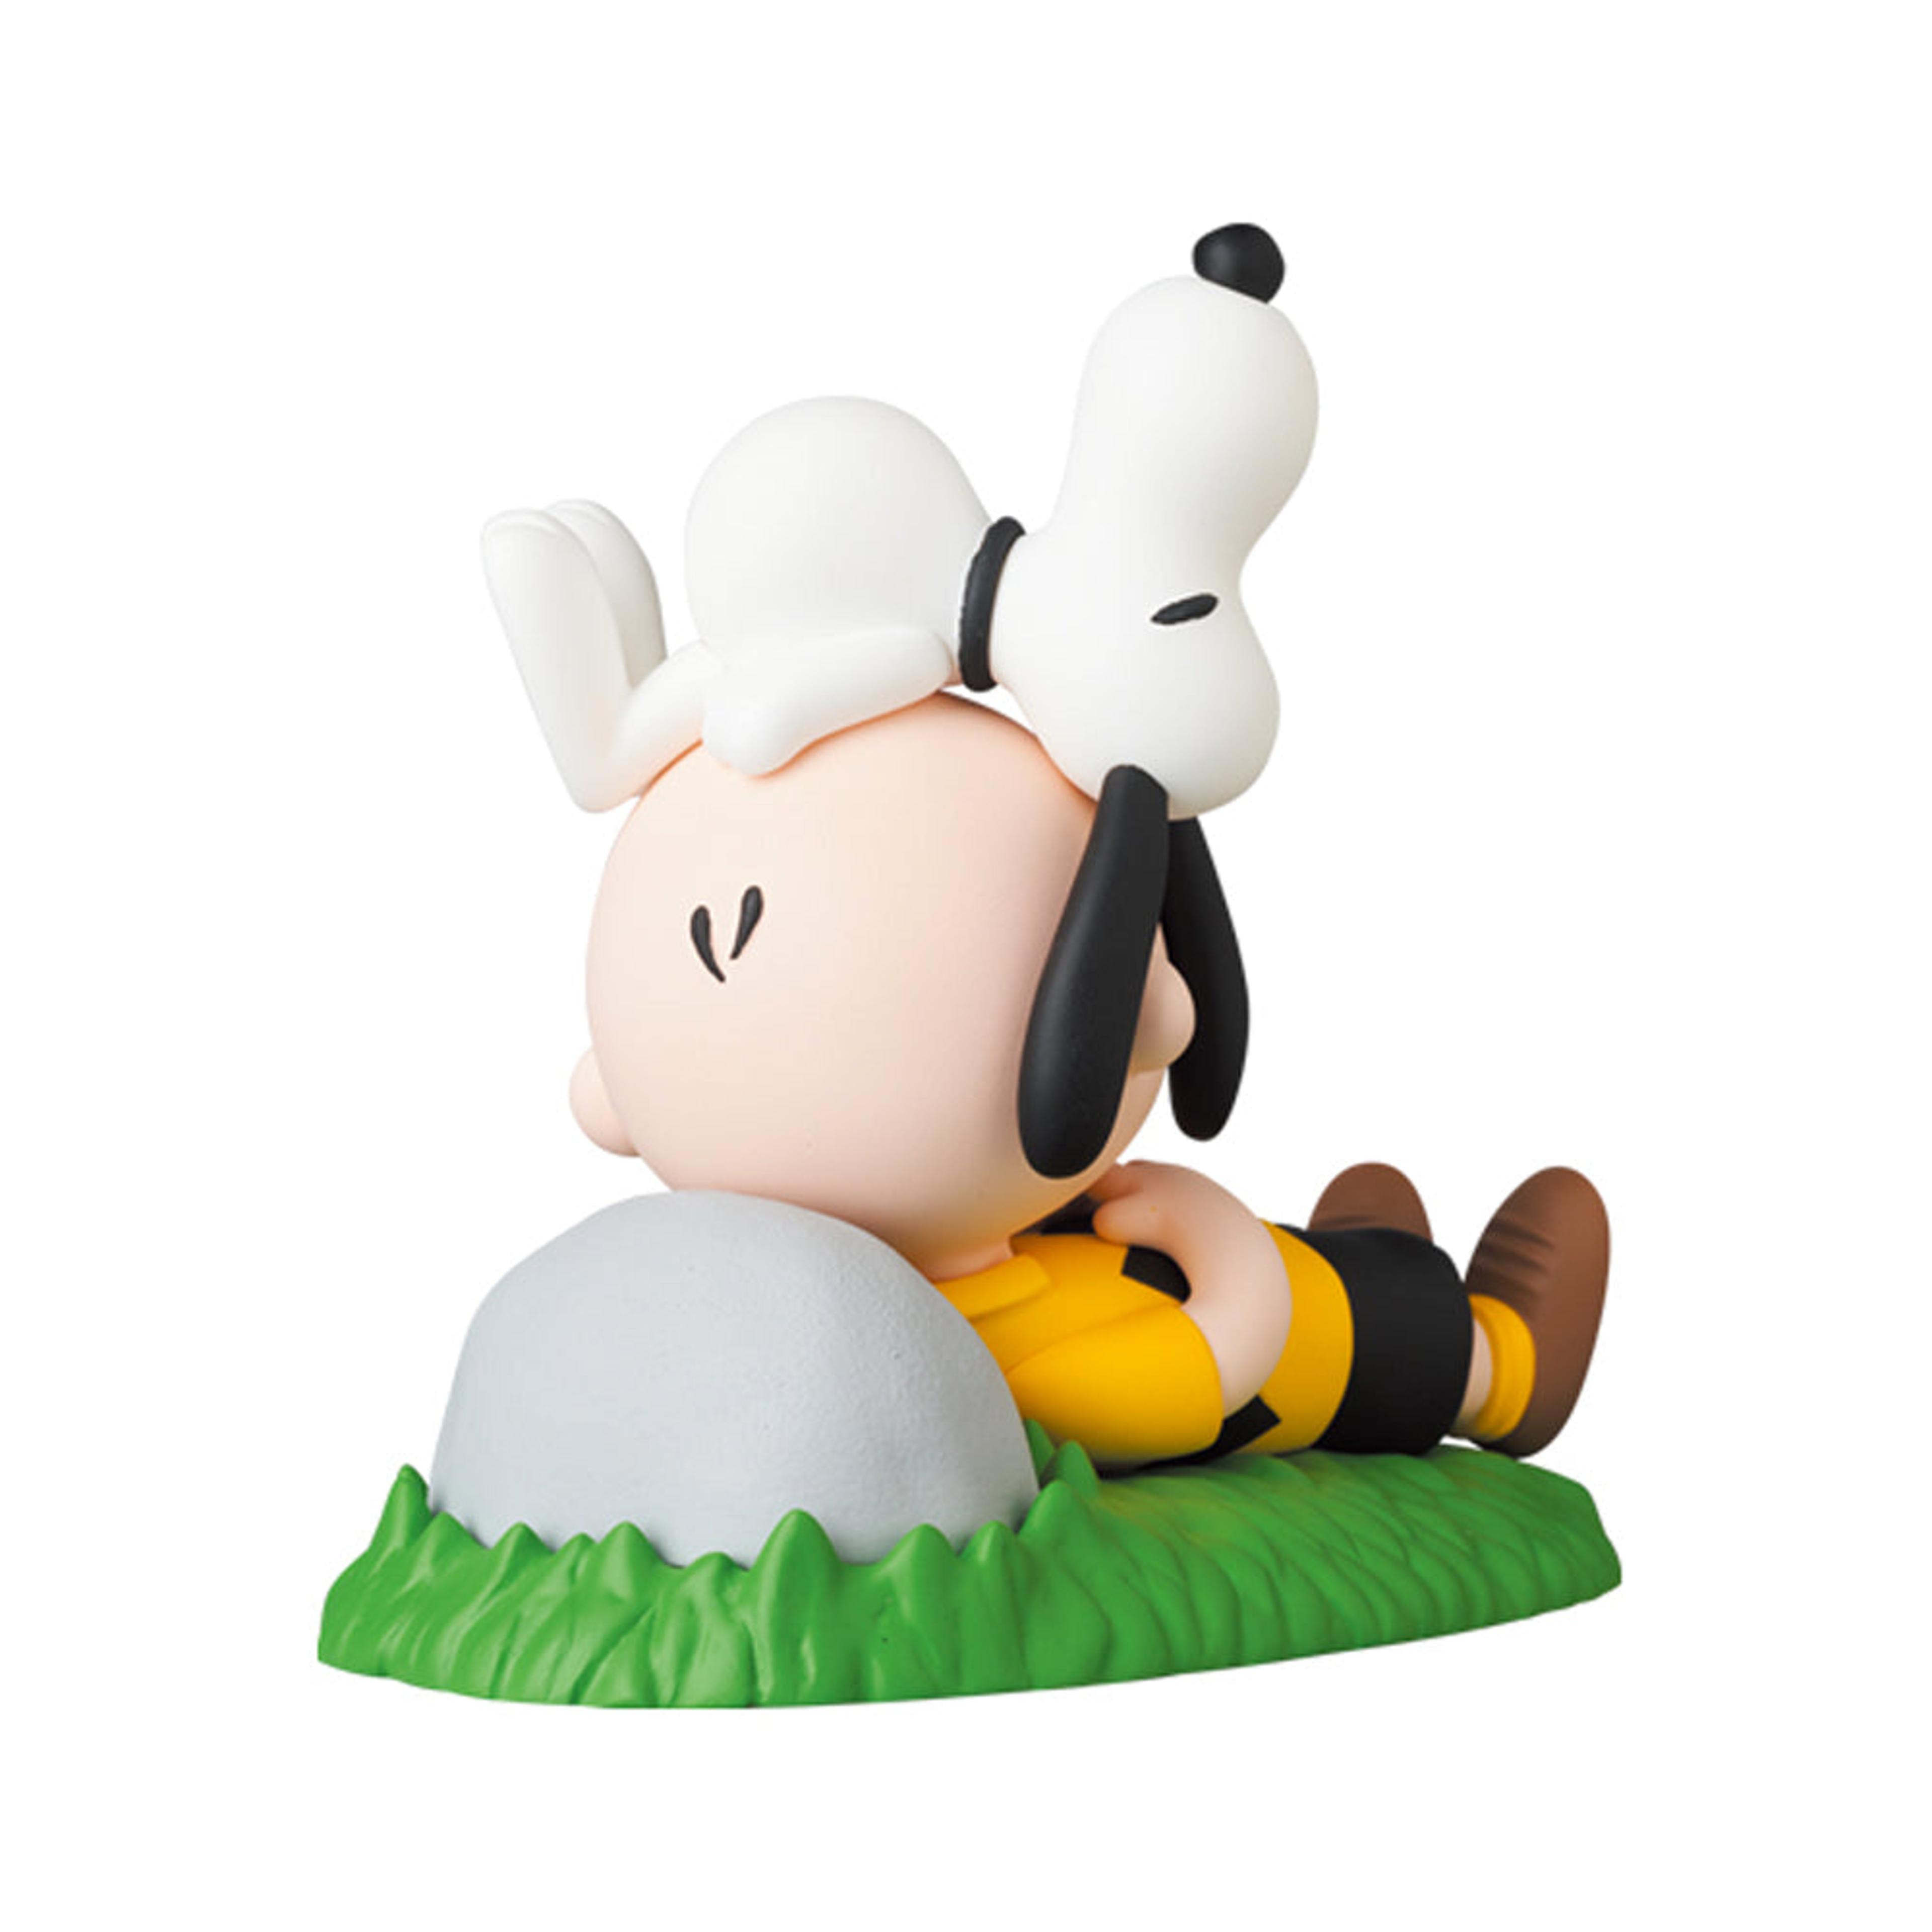 Alternate View 2 of UDF Peanuts Series 13: Napping Charlie Brown & Snoopy Ultra Deta